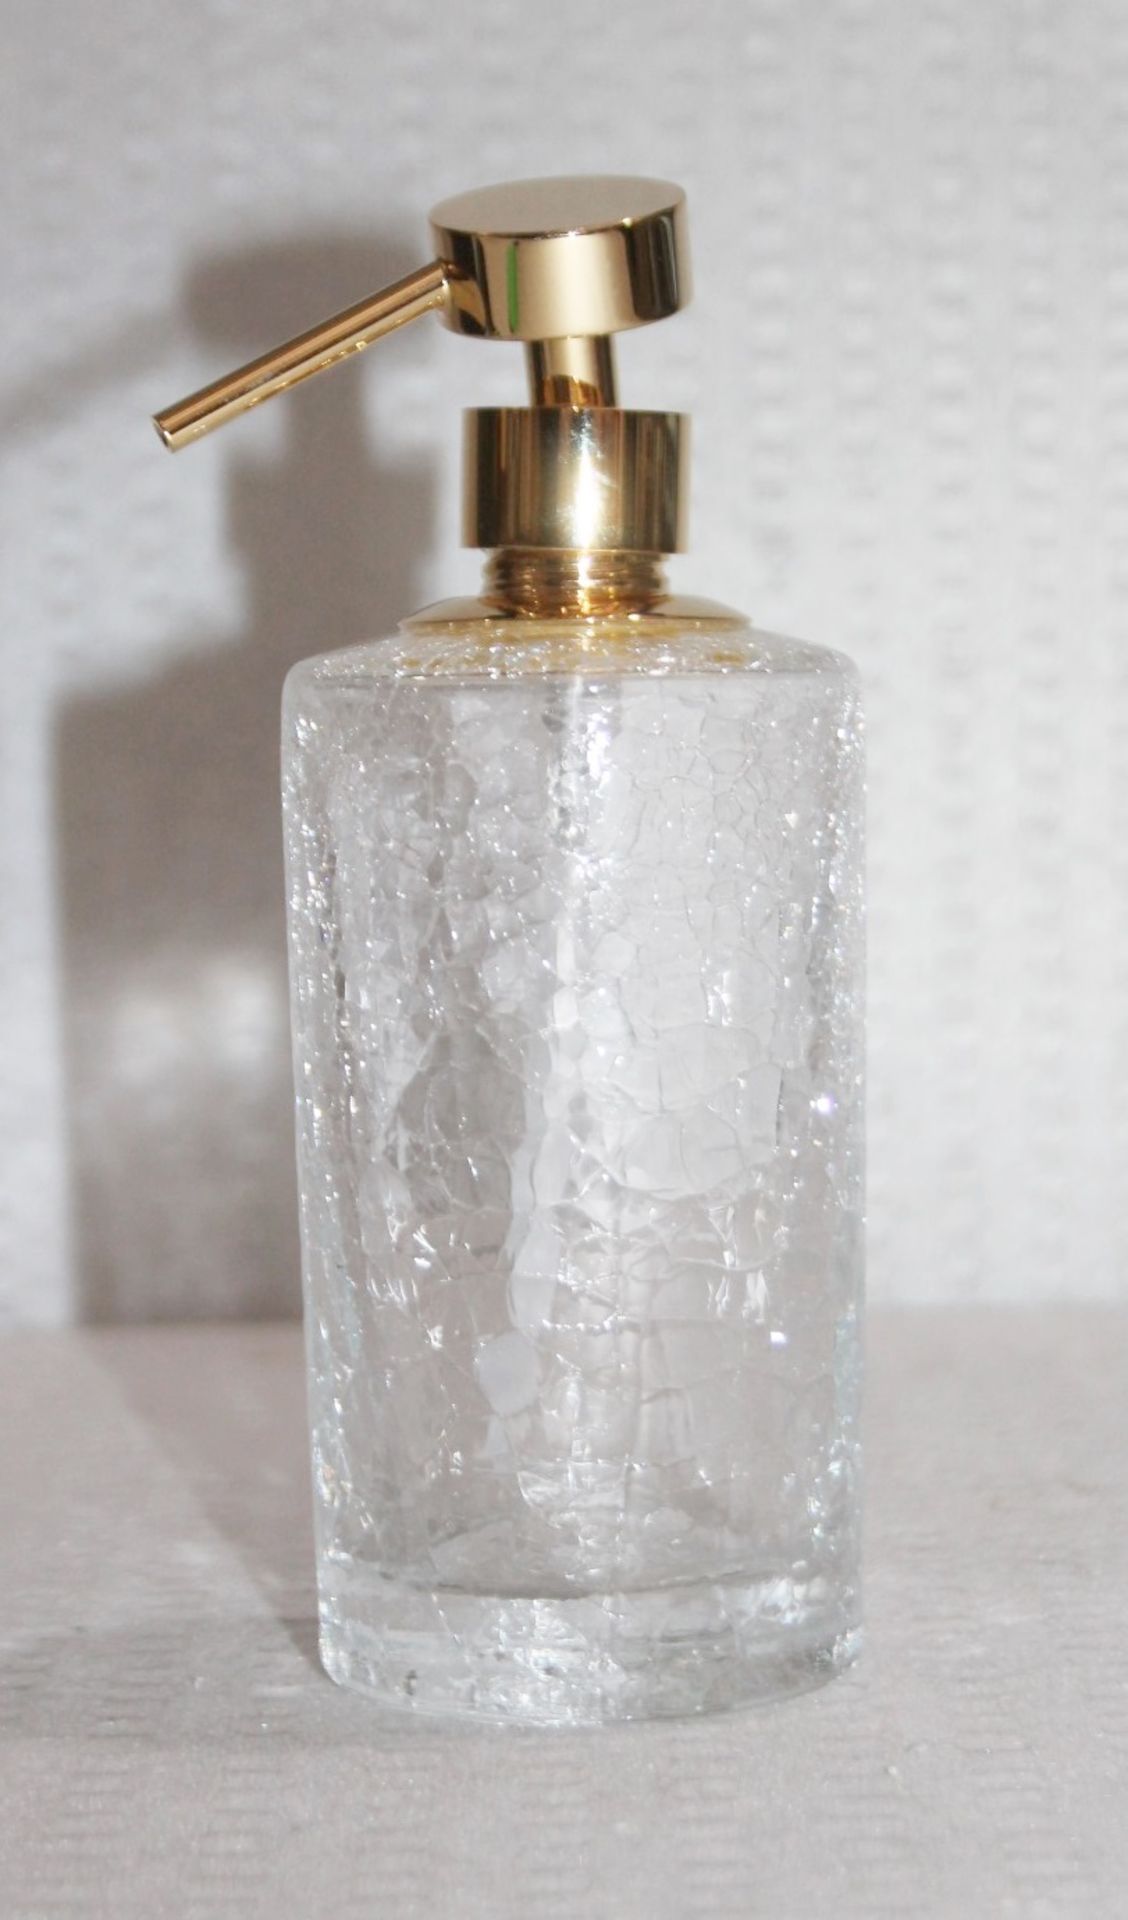 1 x 1 x ZODIAC Luxury 'Cracked Crystal' Soap Dispenser With A 24 karat Gold-Plated Pump - Original - Image 5 of 6